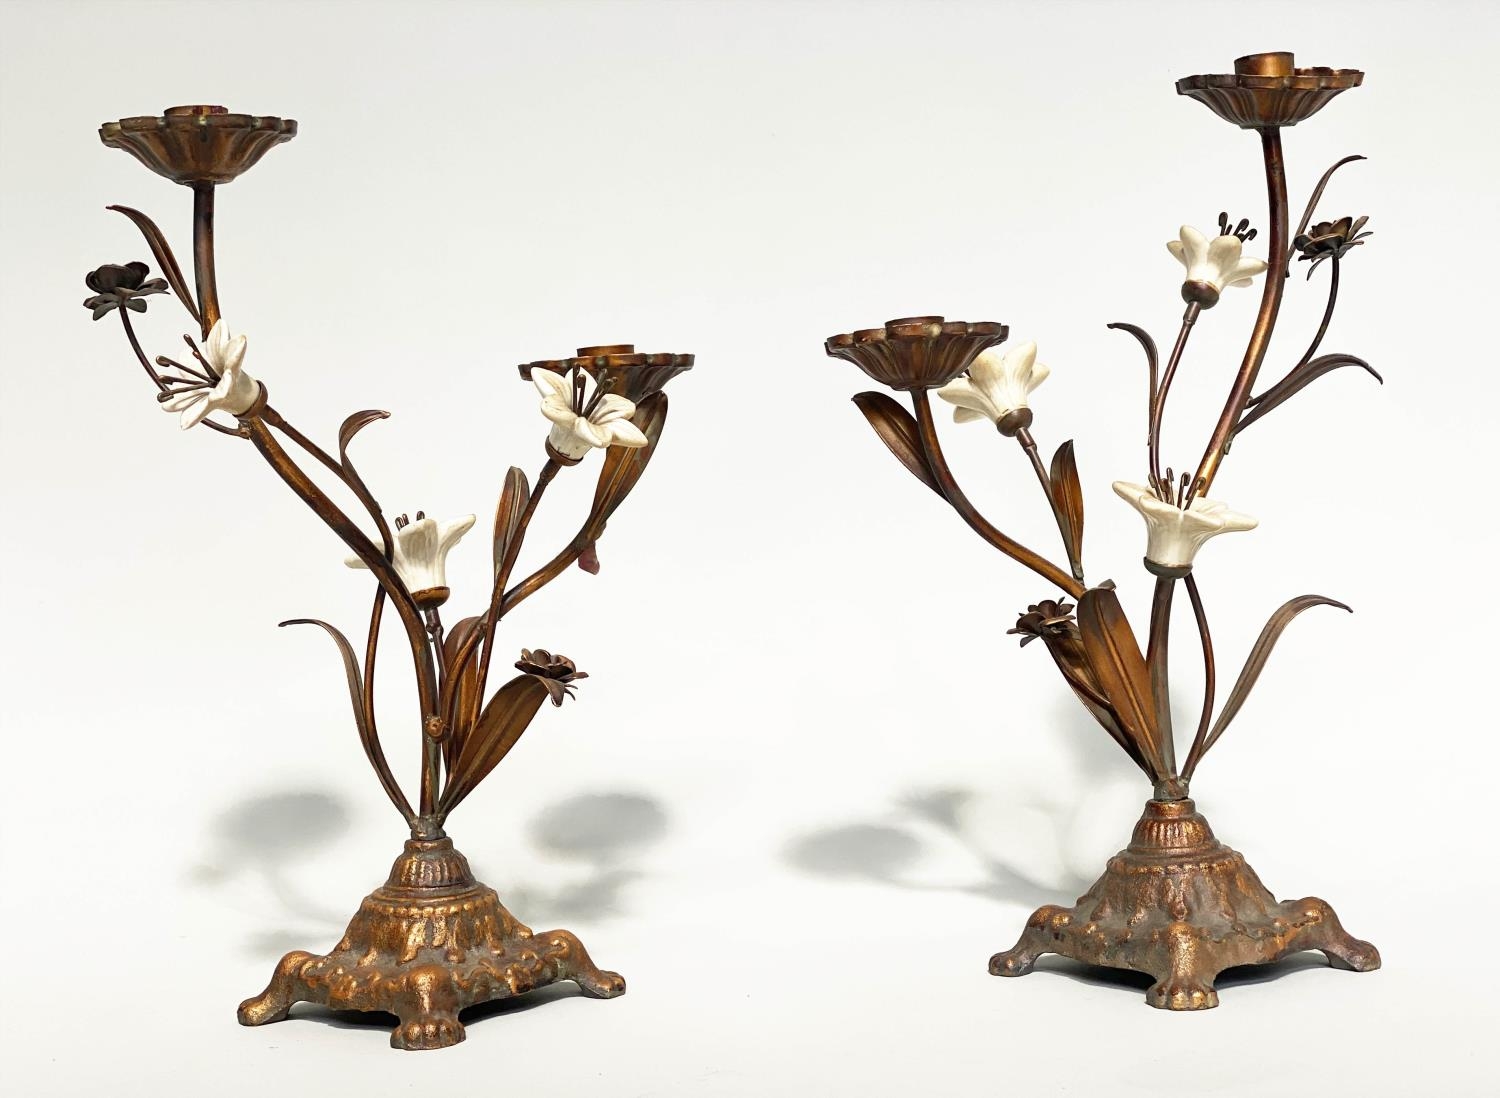 FLOWER CANDLESTICKS, a pair, Italian style cast bronzed metal with ceramic flower heads, 40cm H. (2) - Image 4 of 6